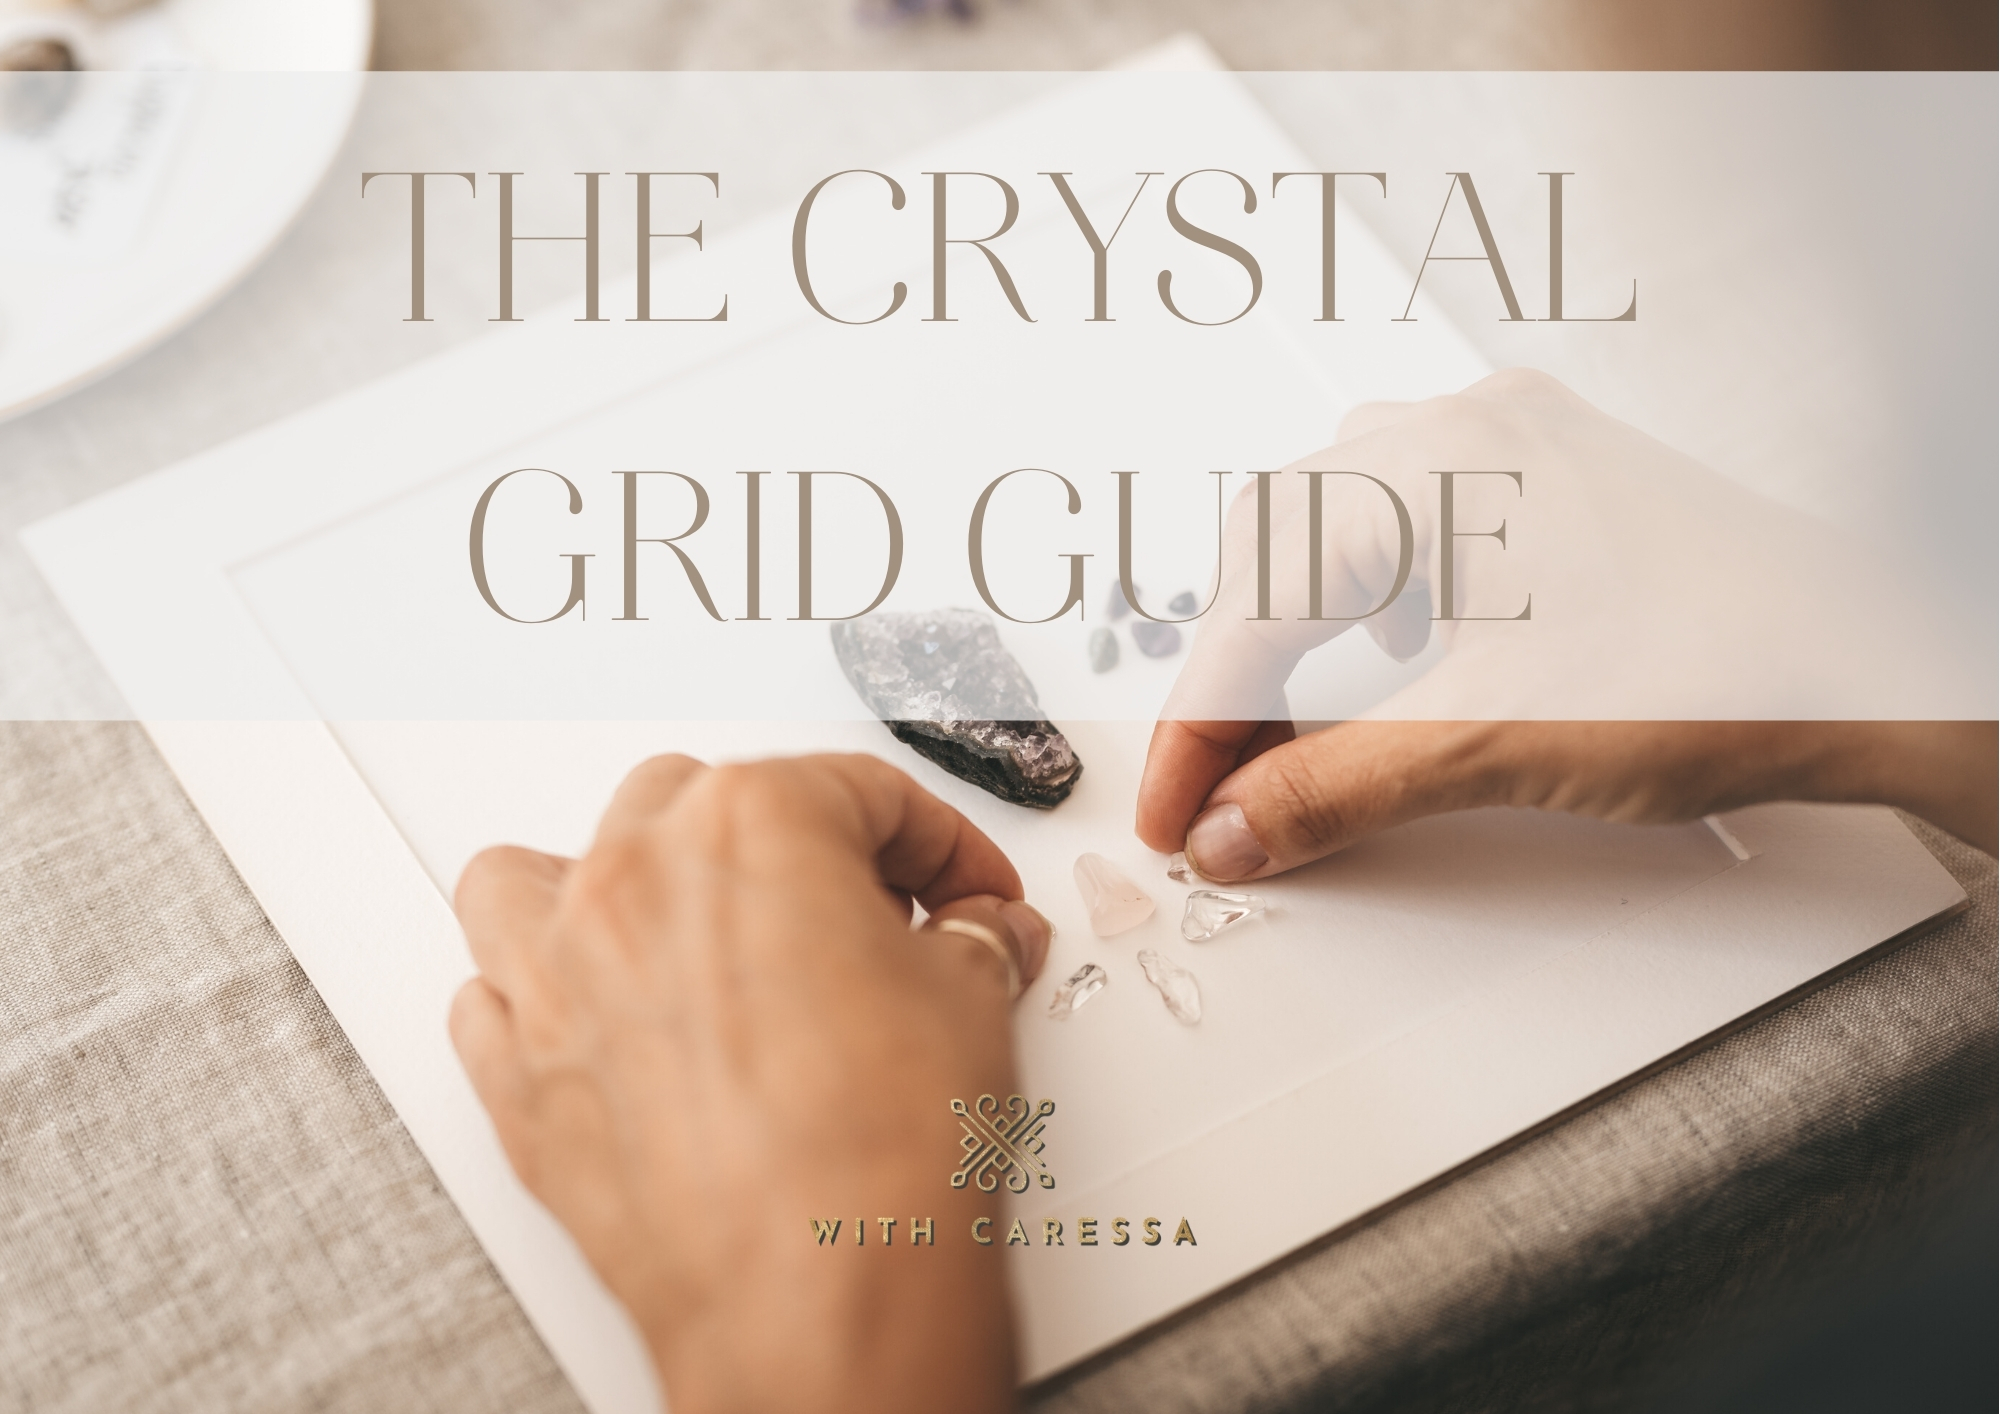 The Crystal Grid Guide